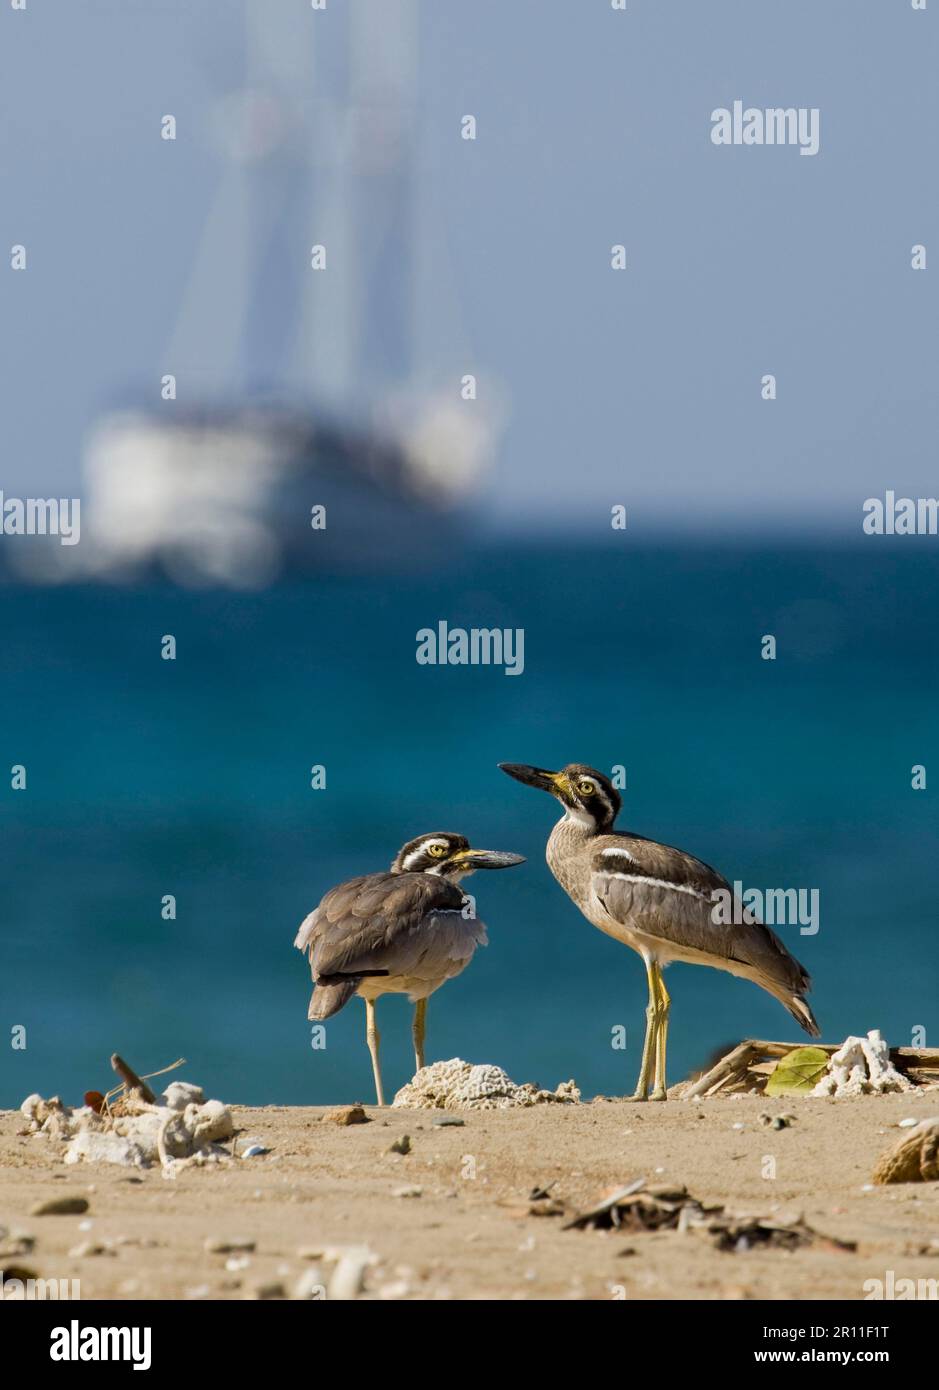 Beach stone-curlew (Esacus giganteus) two adults, standing on the beach, with ship in the background, Komodo Island, Indonesia Stock Photo